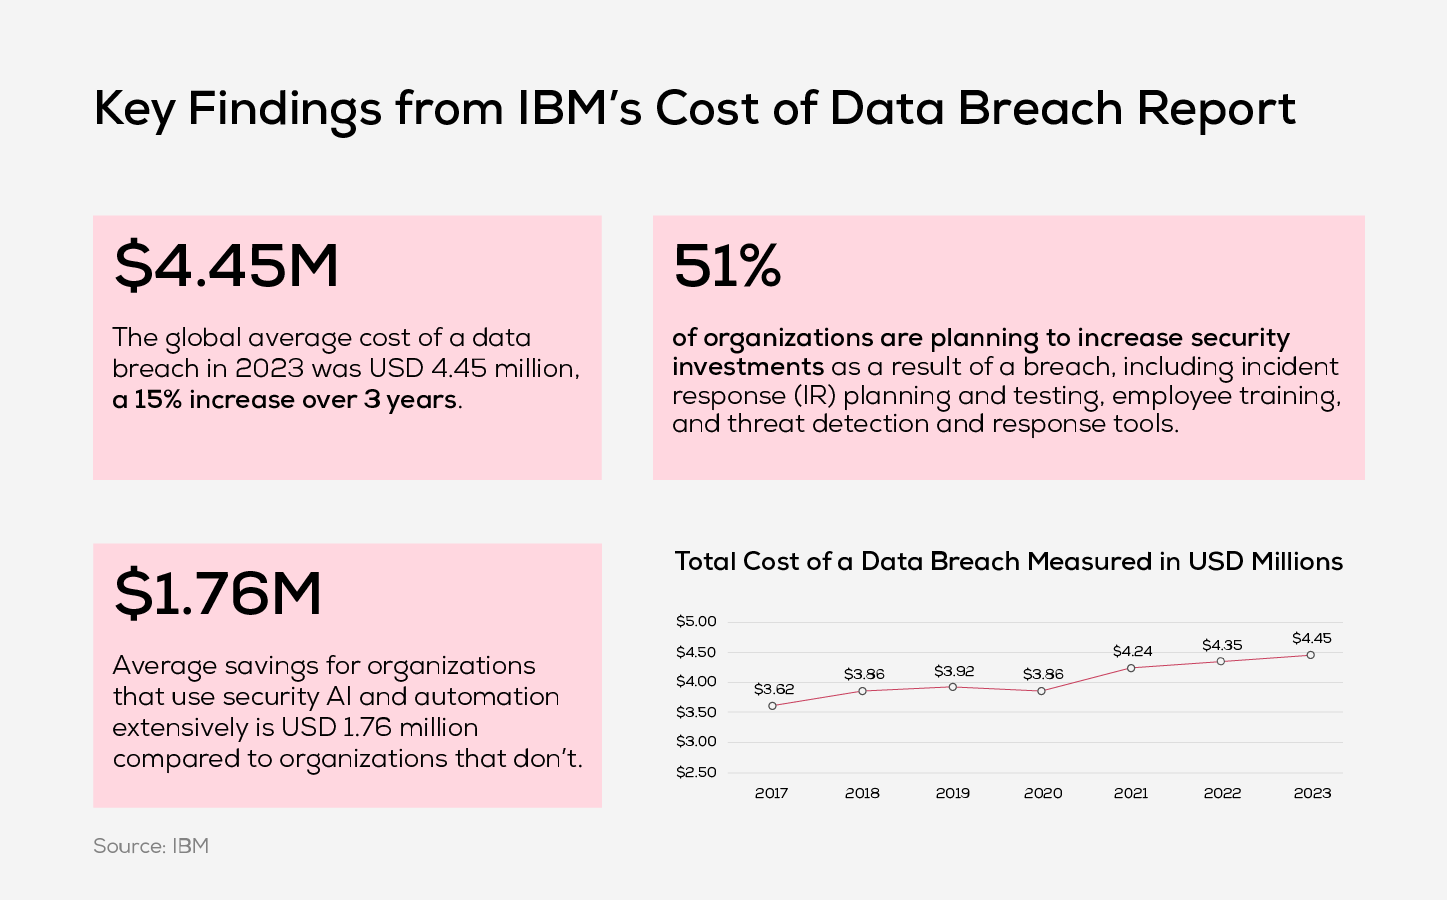 Key Findings from IBM Cost of Data Breach Report